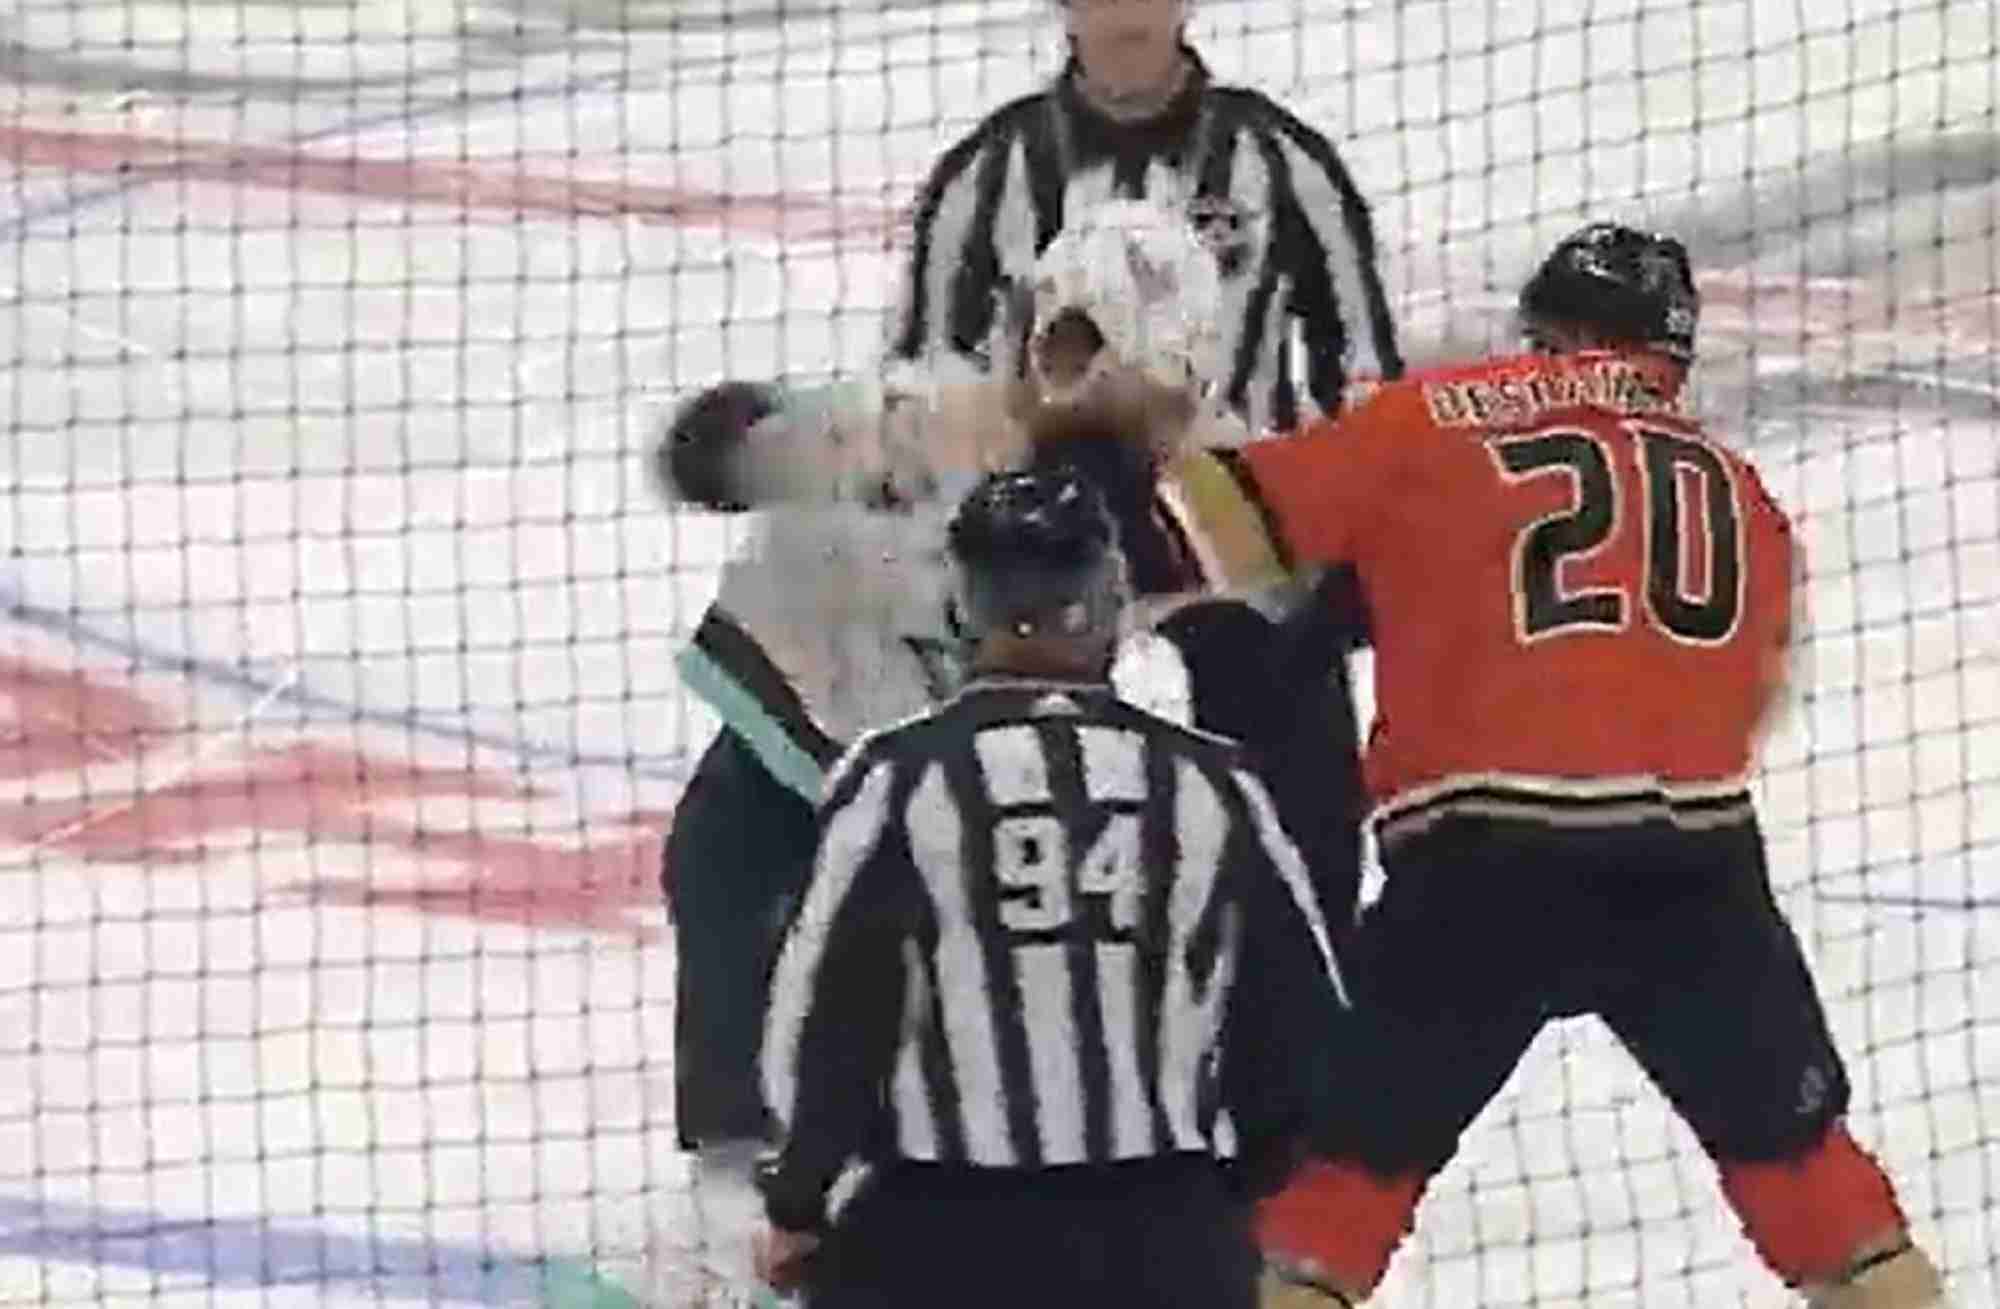 Bareknuckle Boxing Brawl Breaks Out At Hockey Match